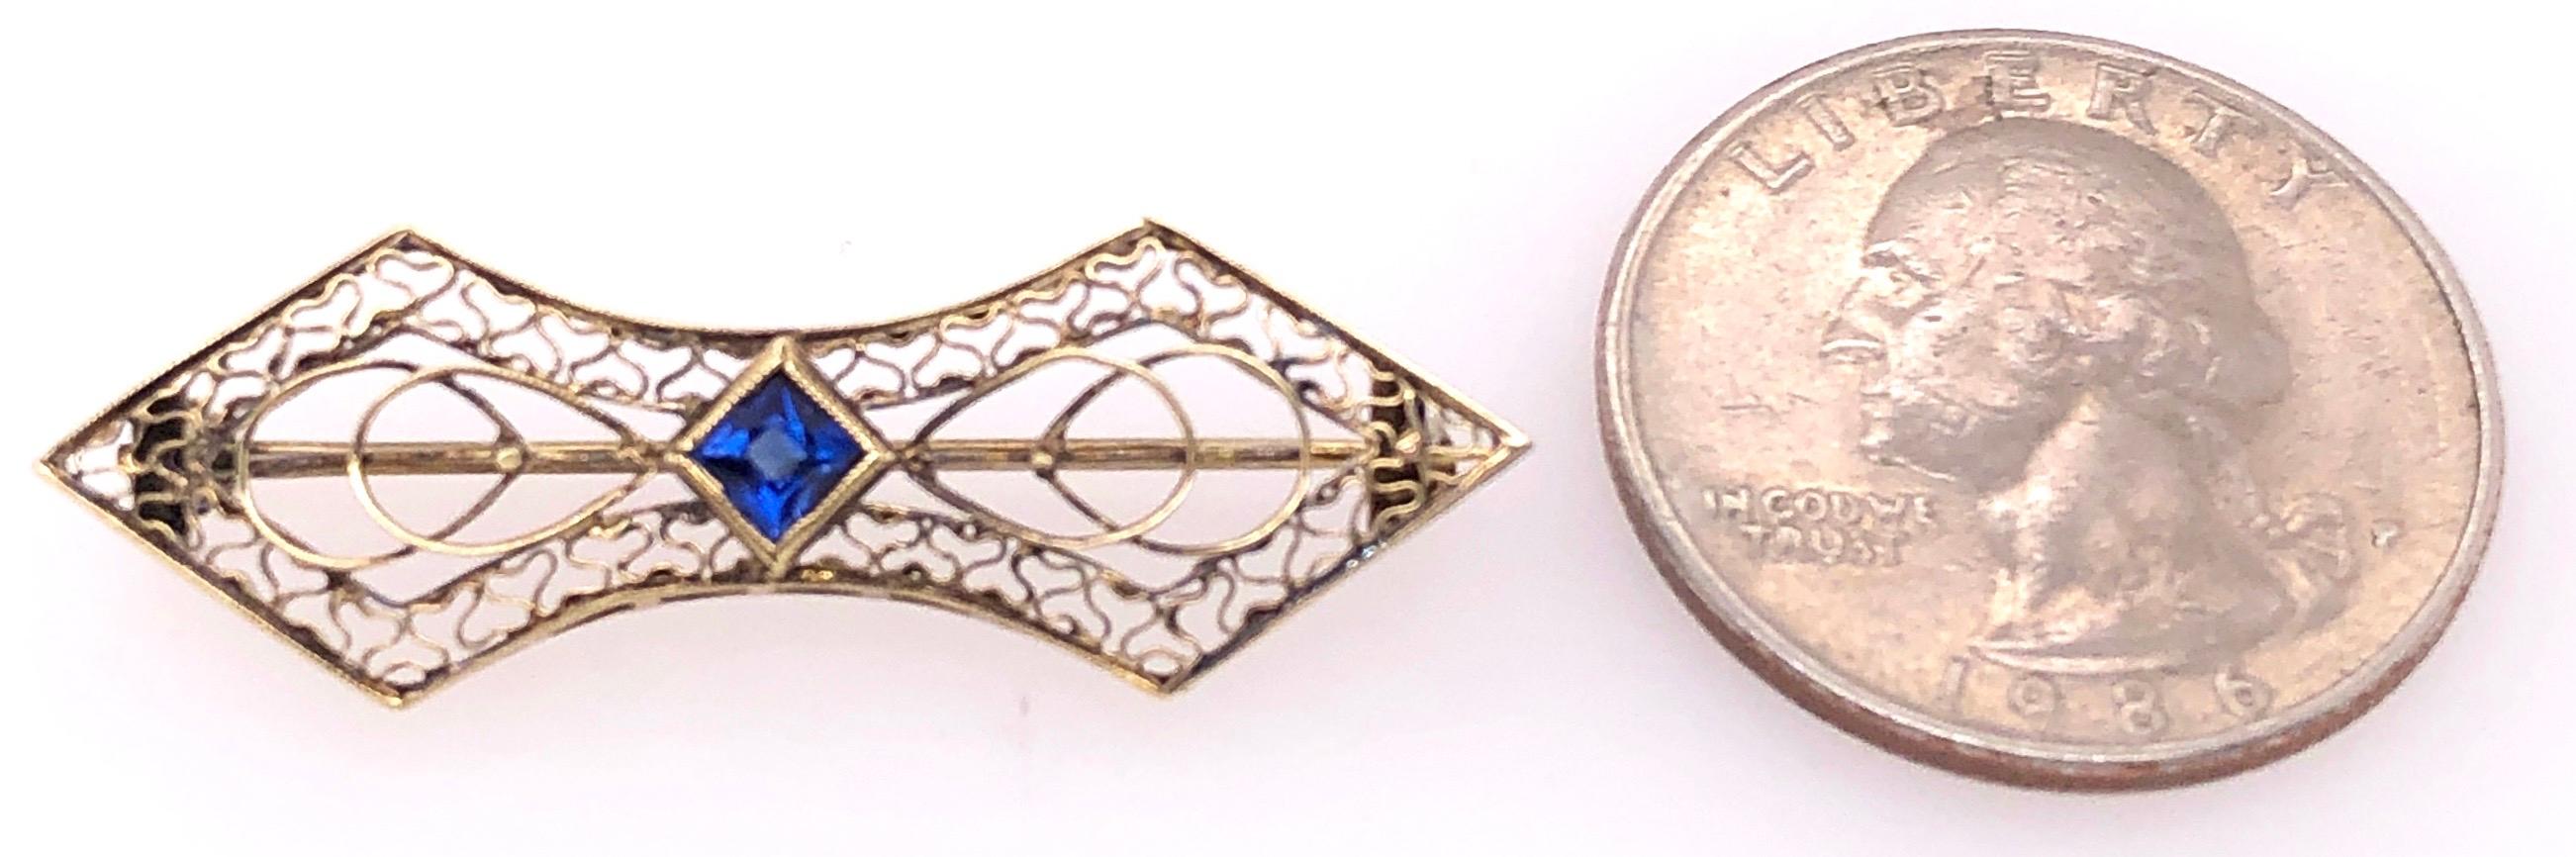 14 Karat Yellow Gold with Sapphire Center Stone Filigree Brooch For Sale 2